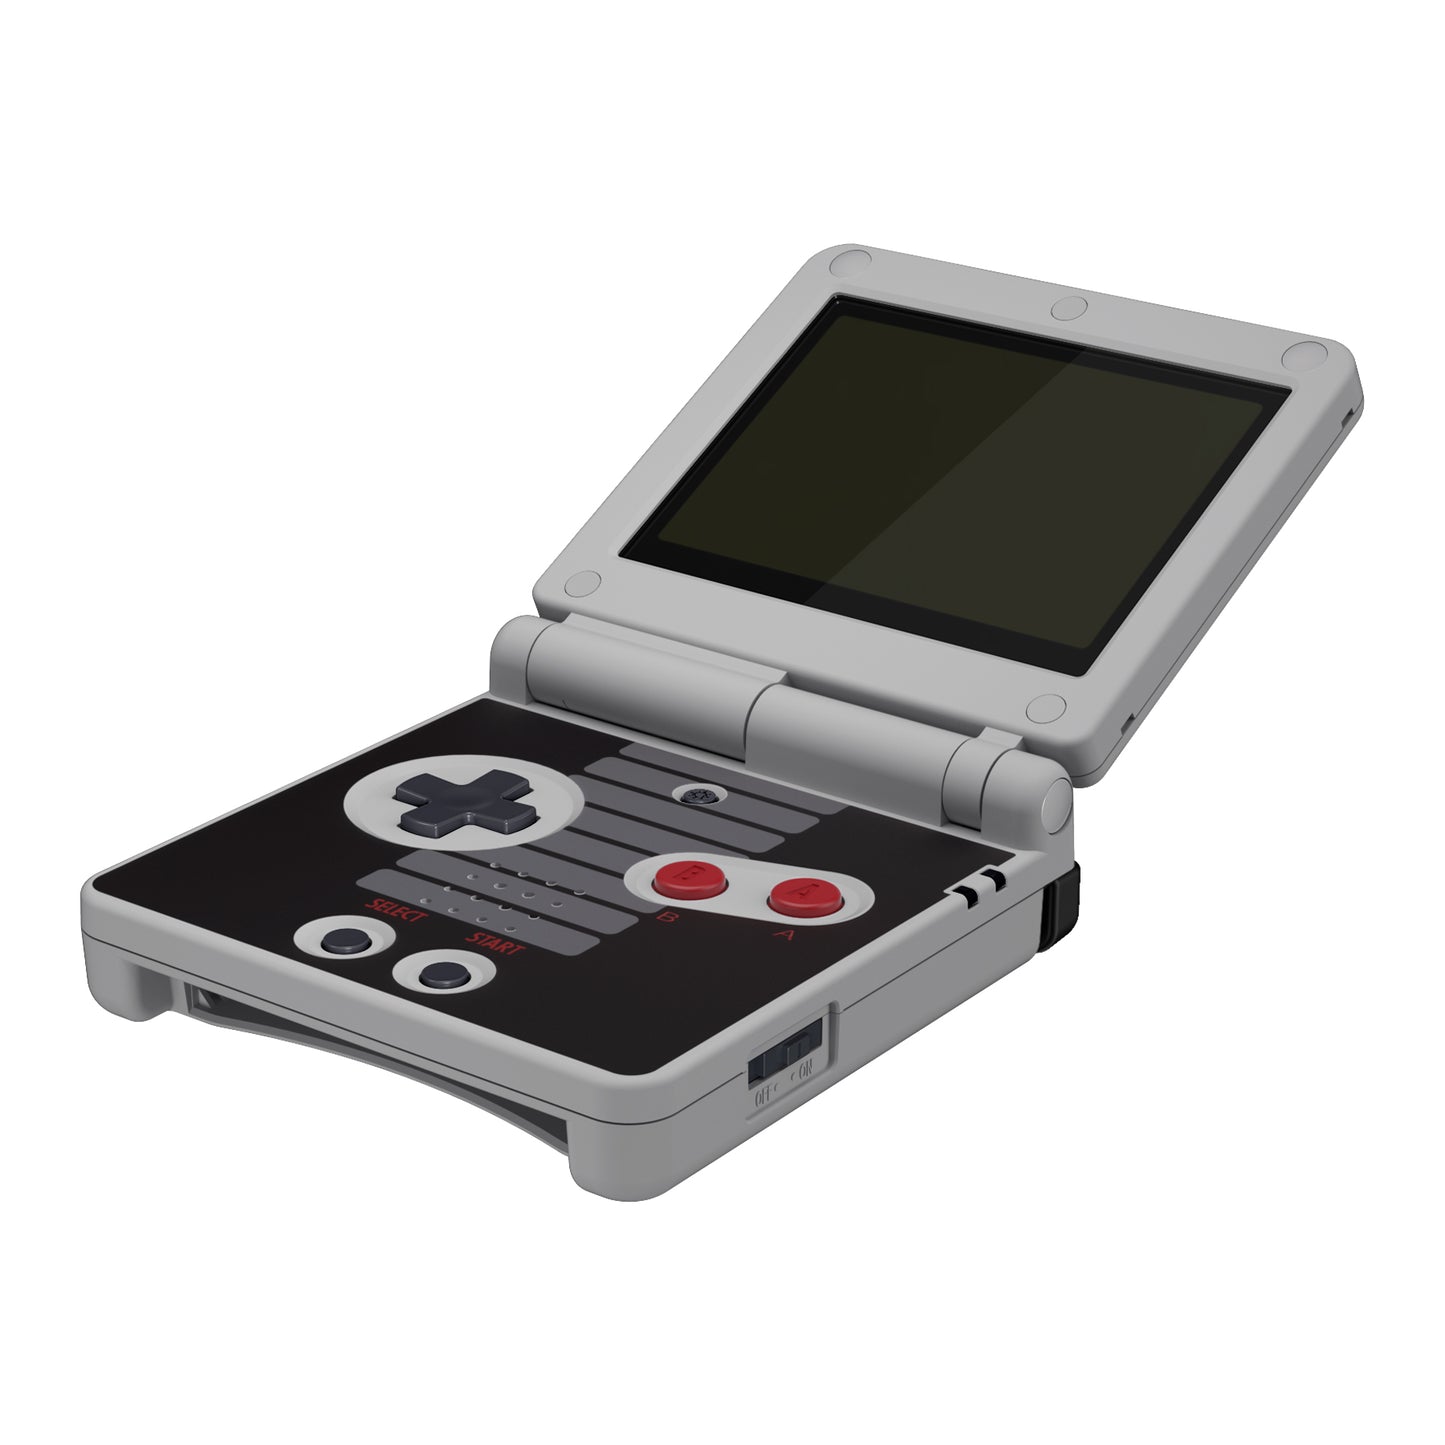 Nintendo: Extremely Wide GameBoy Advance Is An Absolute Unit